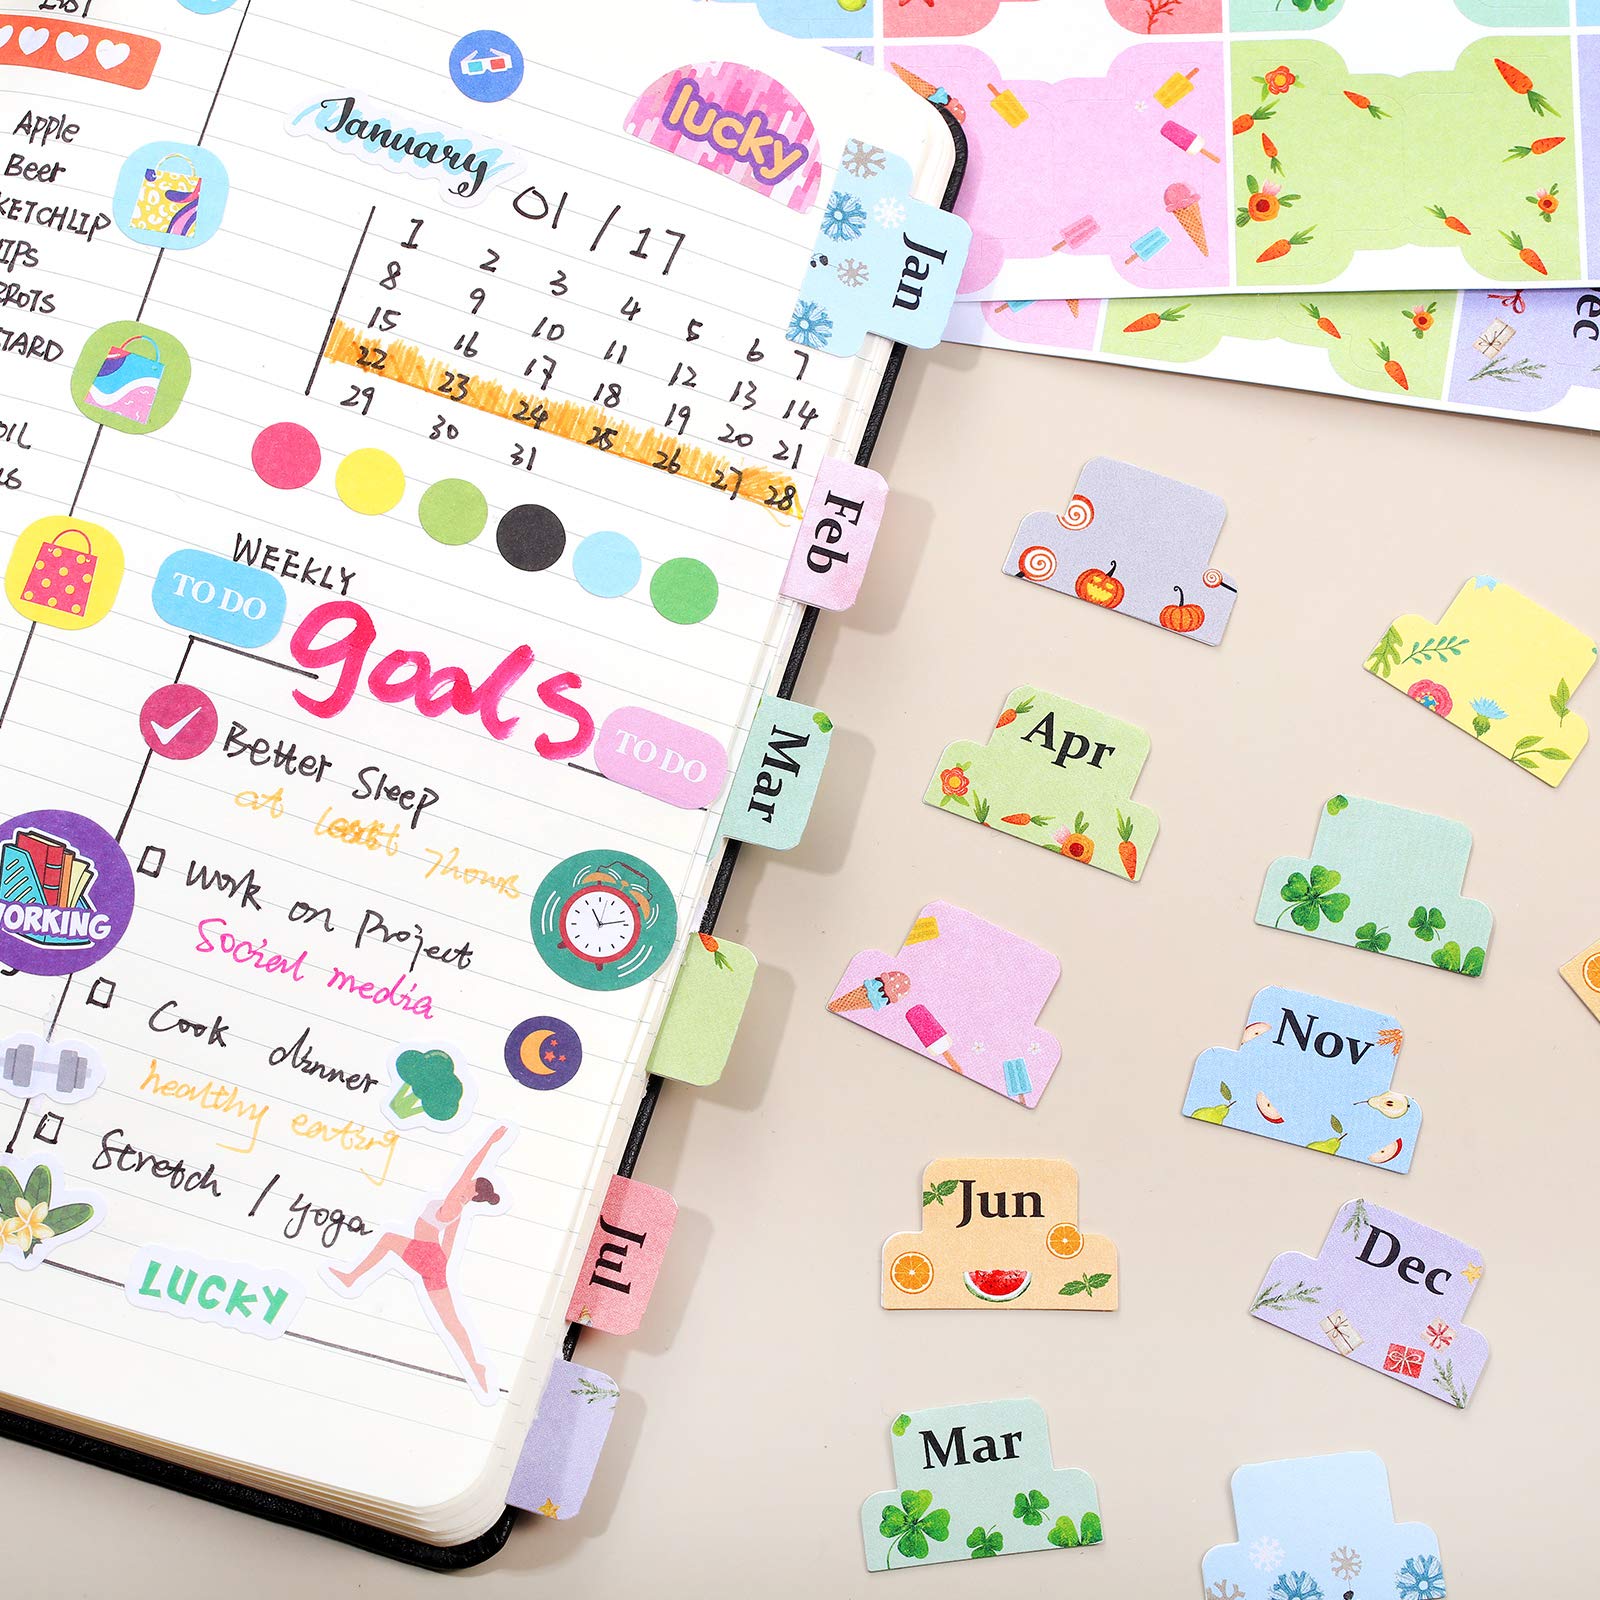 48 Pieces Adhesive Monthly Tabs Planner Stickers, 24 Month Tabs and 24 Blank Tabs Colorful Decorative Monthly Index Tab for Office School Study Planner Stickers and Accessories Journal Organization